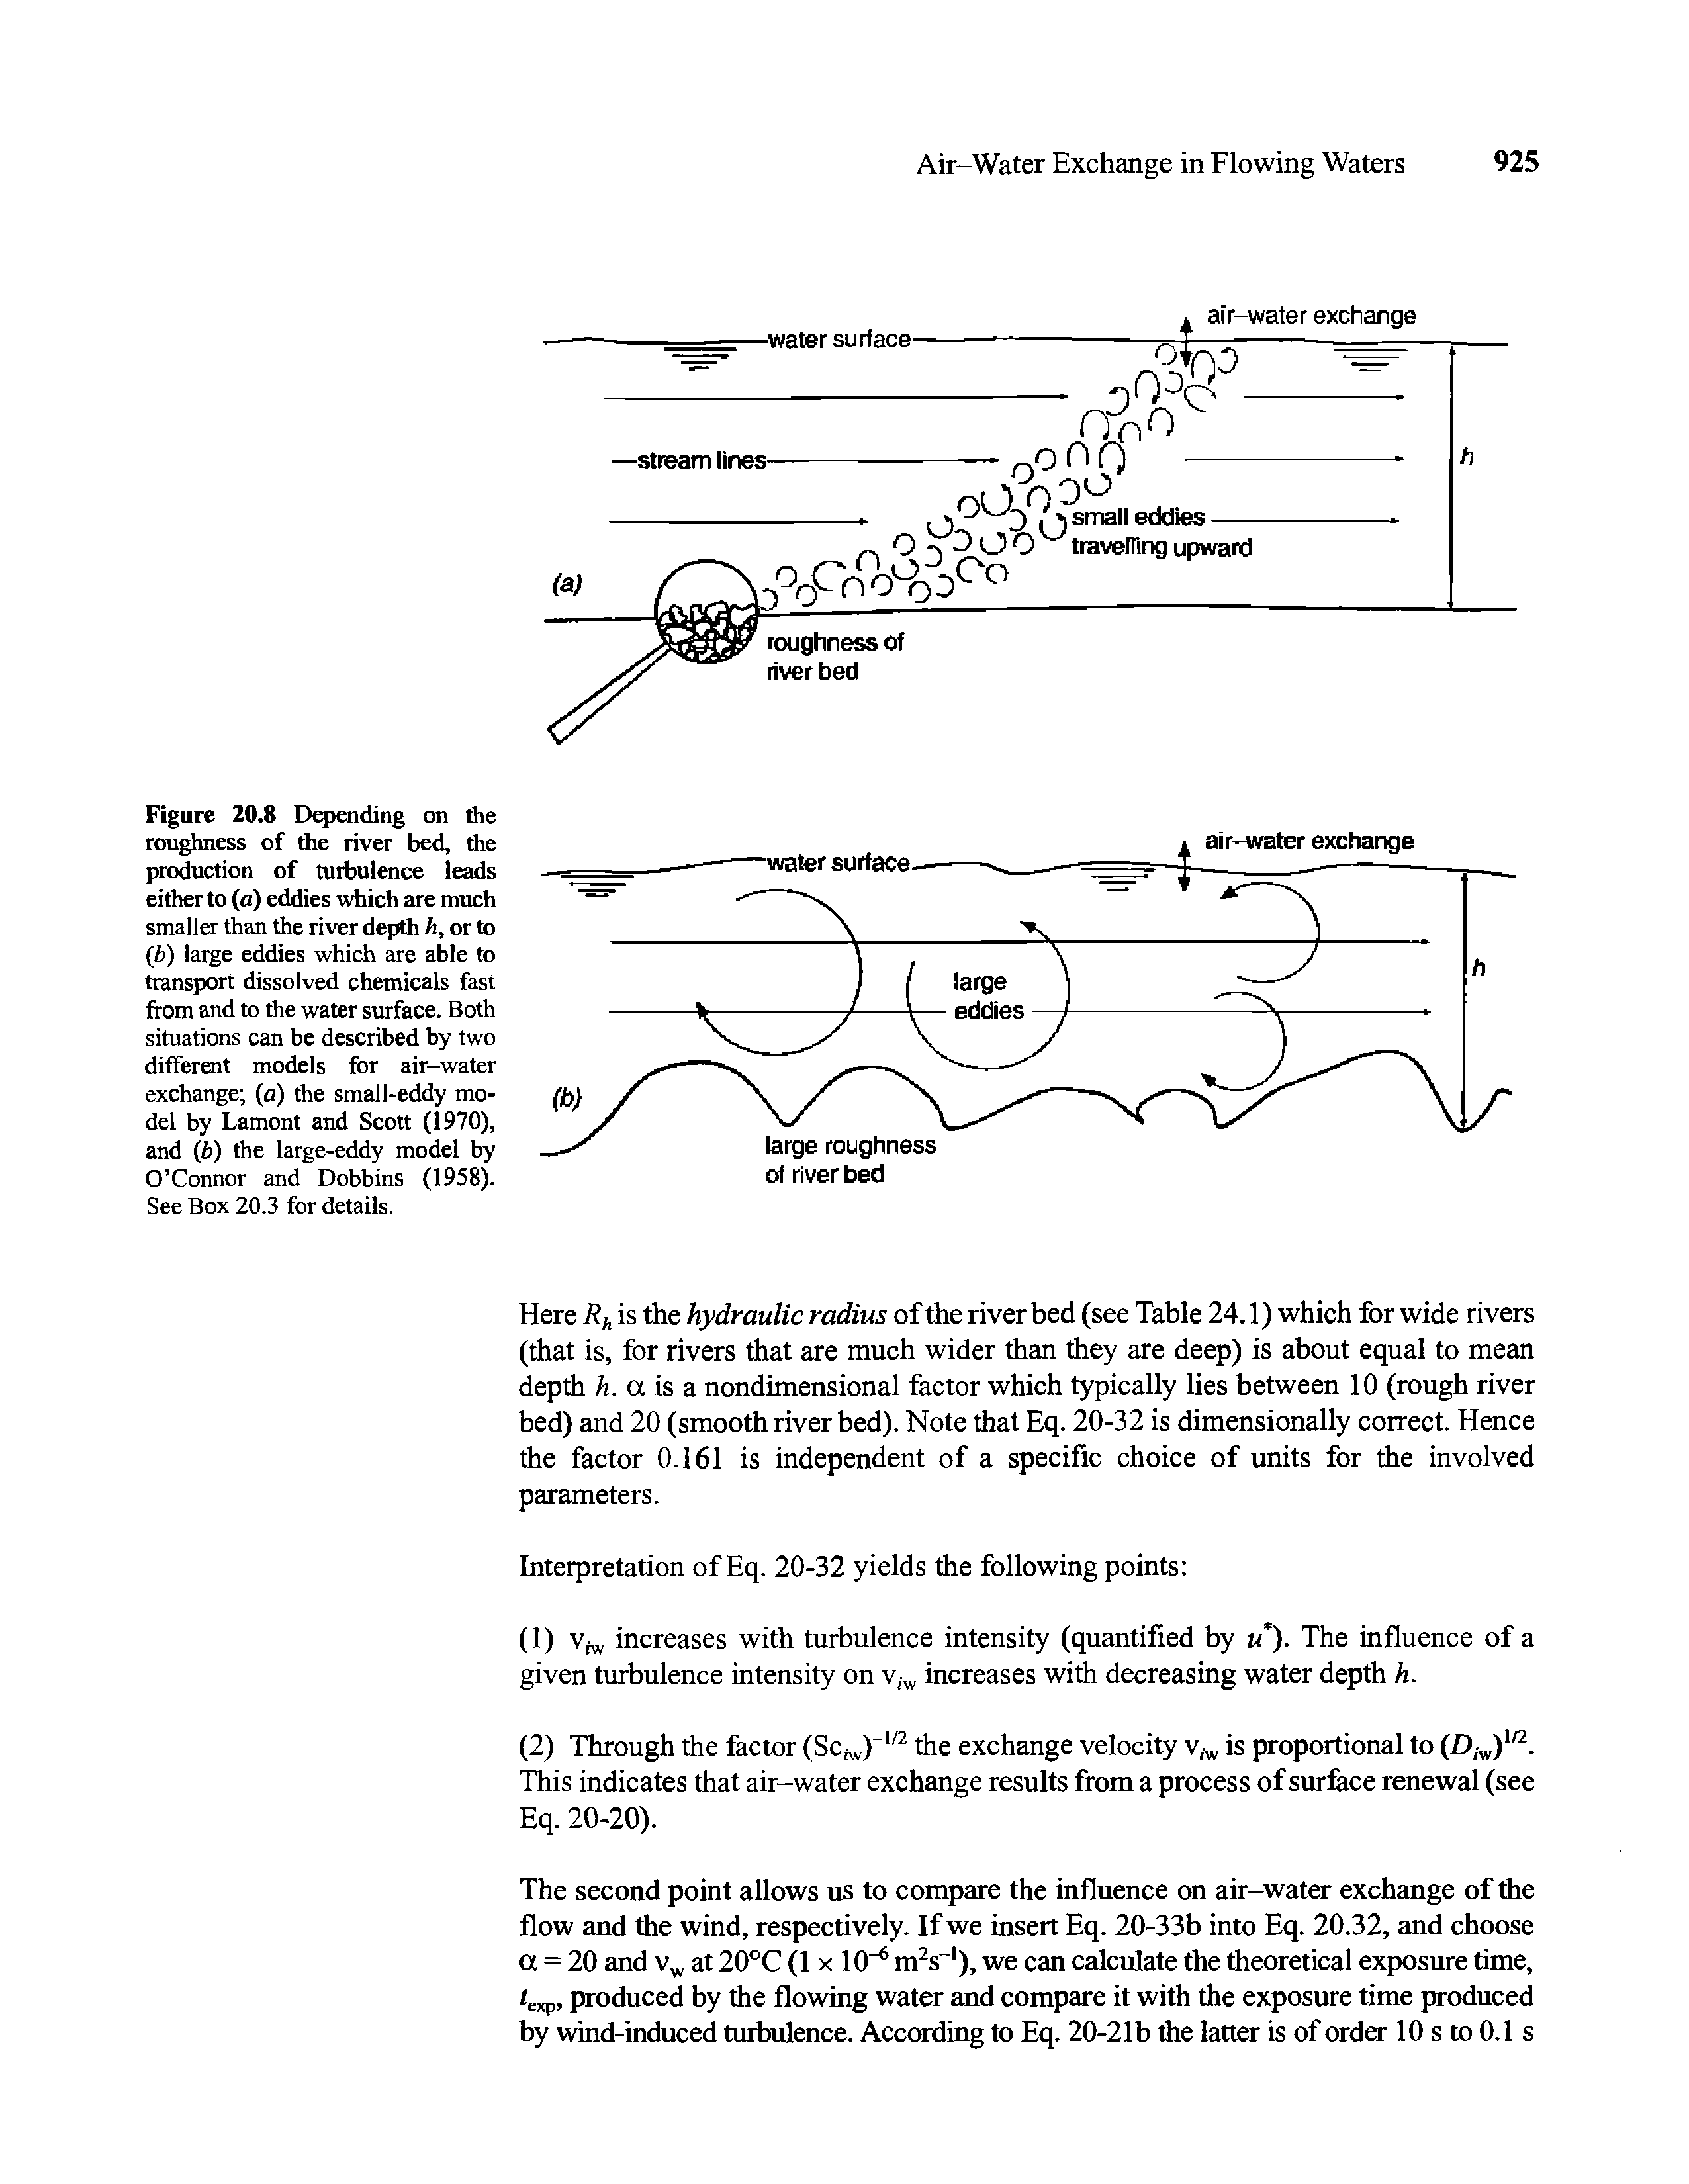 Figure 20.8 Depending on the roughness of the river bed, the production of turbulence leads either to (a) eddies which are much smaller than the river depth h, or to (b) large eddies which are able to transport dissolved chemicals fast from and to the water surface. Both situations can be described by two different models for air-water exchange (a) the small-eddy model by Lamont and Scott (1970), and (b) the large-eddy model by O Connor and Dobbins (1958). See Box 20.3 for details.